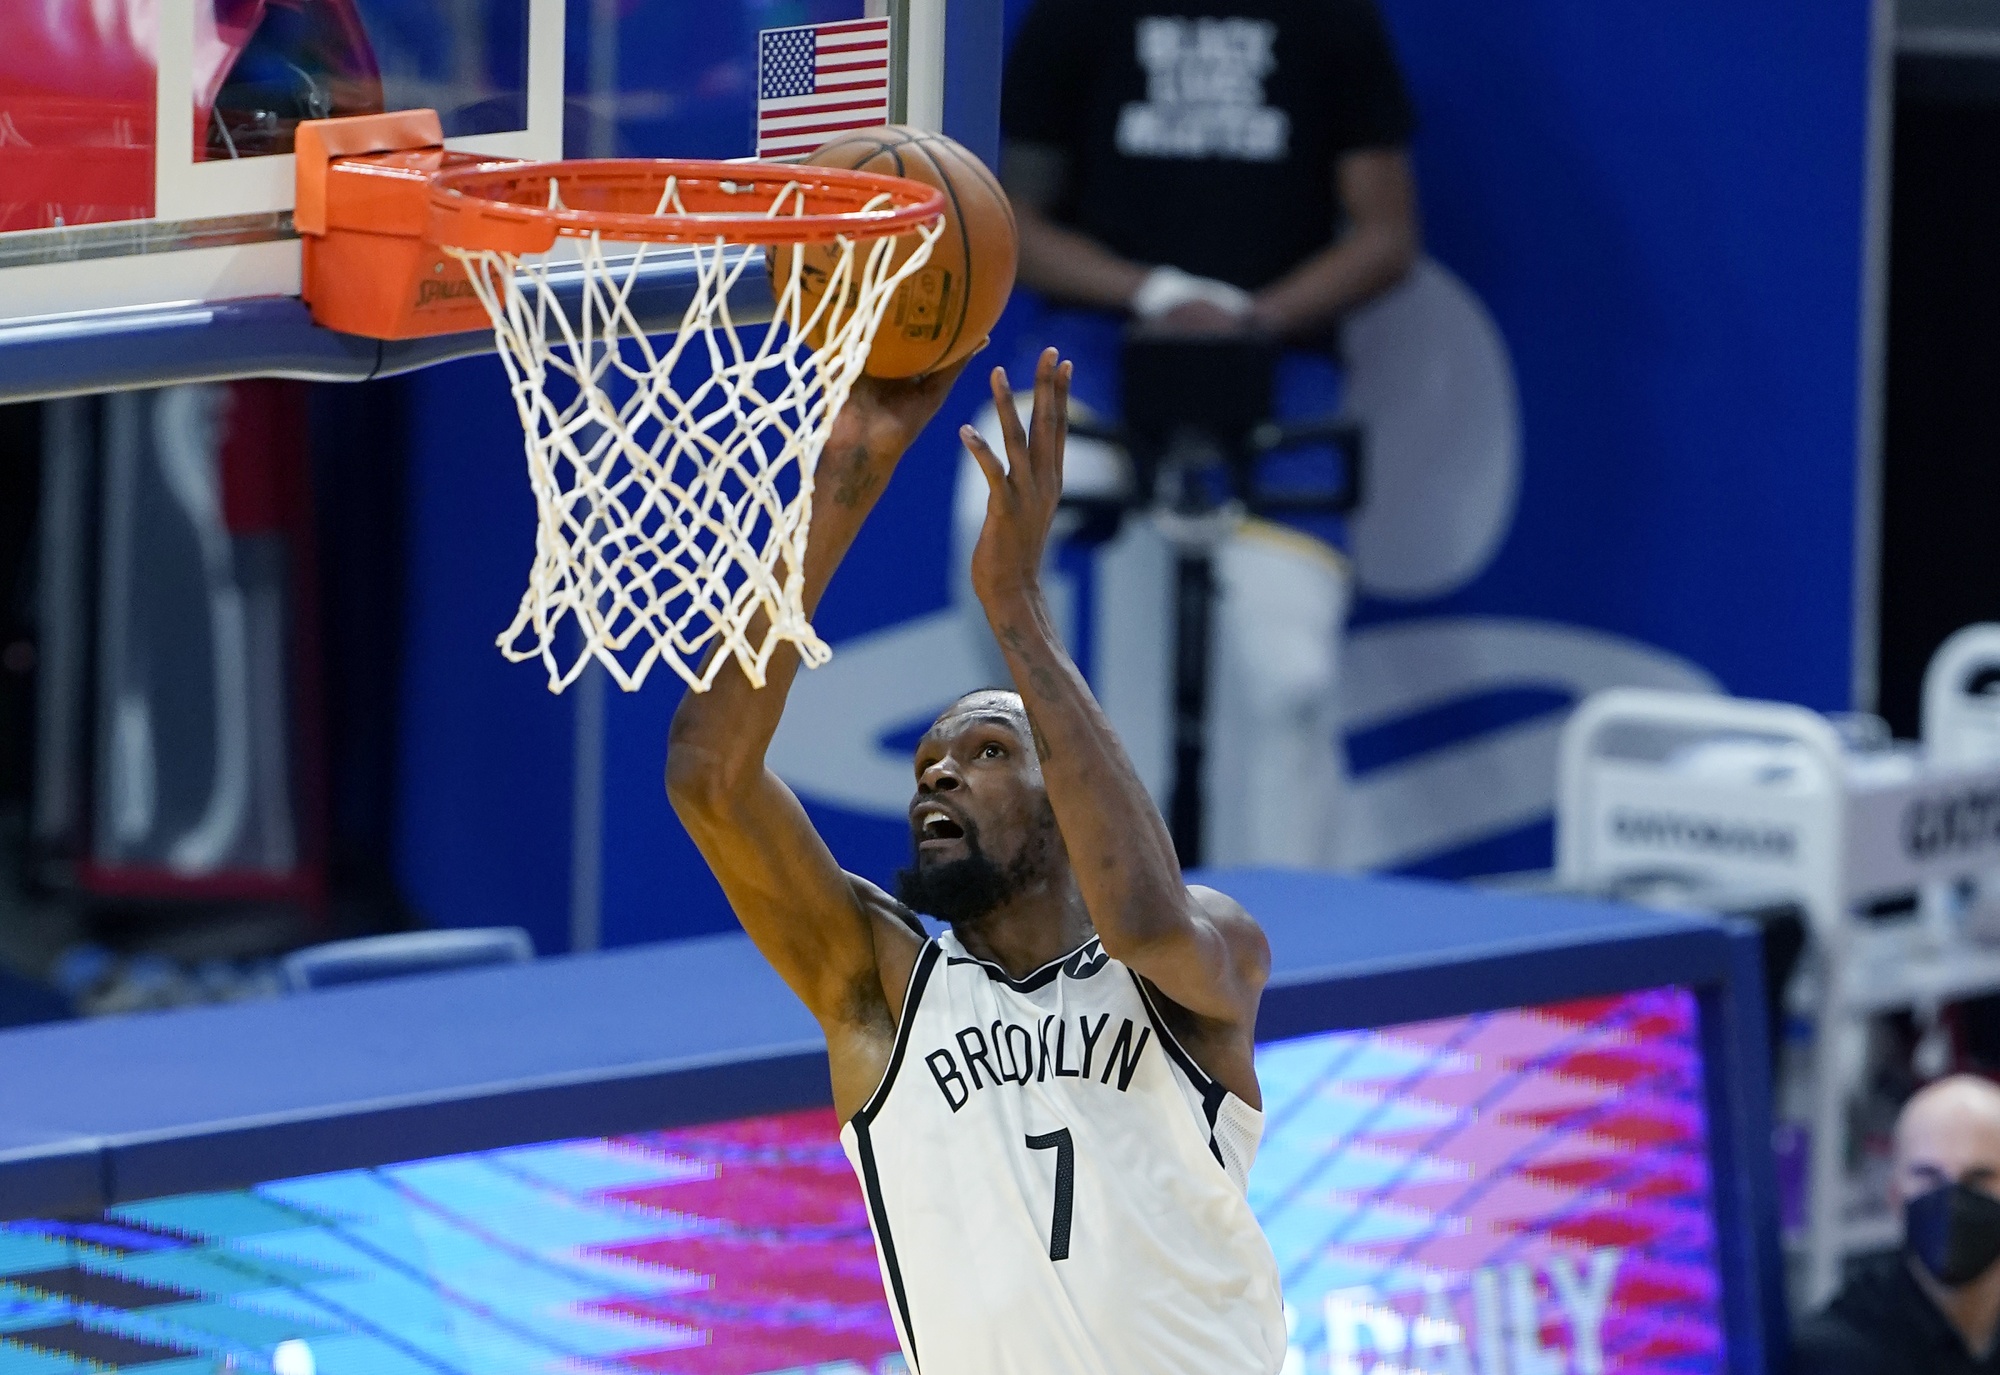 Nets' Kevin Durant has impressive showing in return, but loss adds